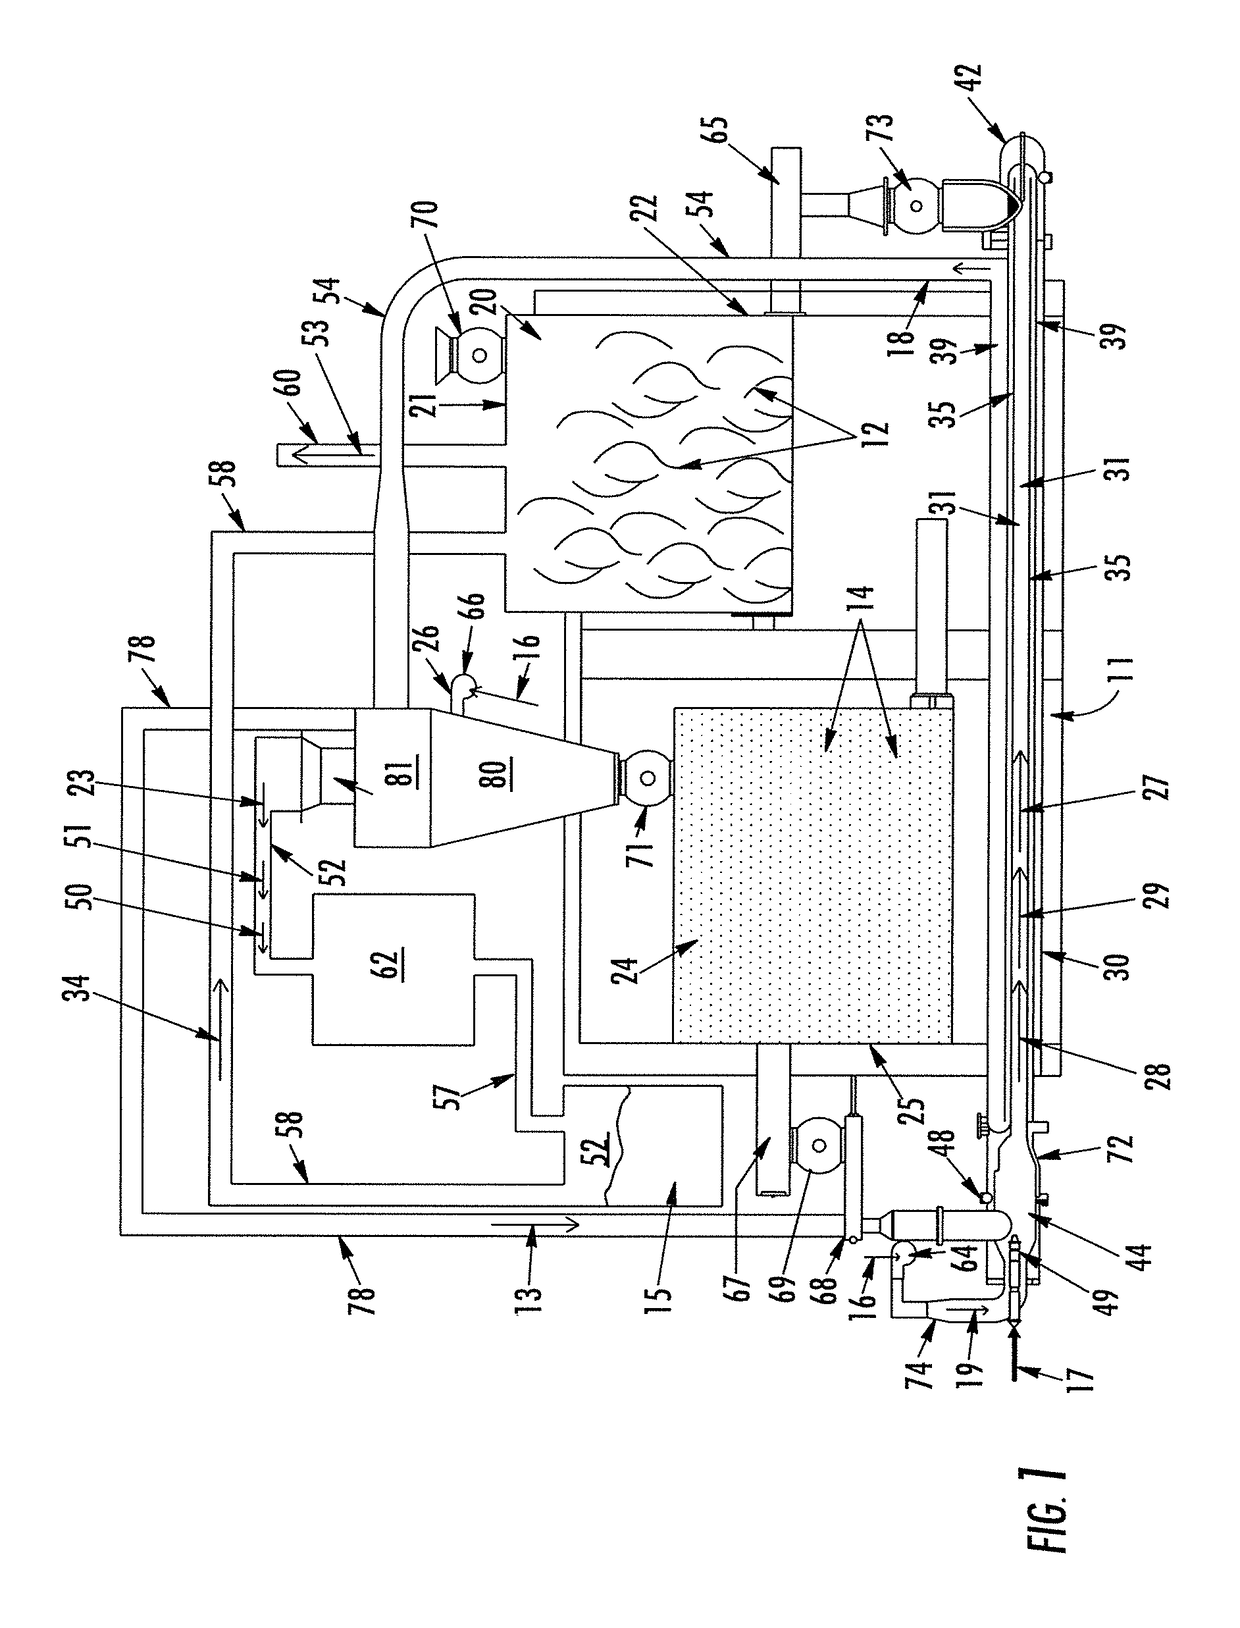 Systems, apparatus and methods for optimizing the rapid pyrolysis of biomass